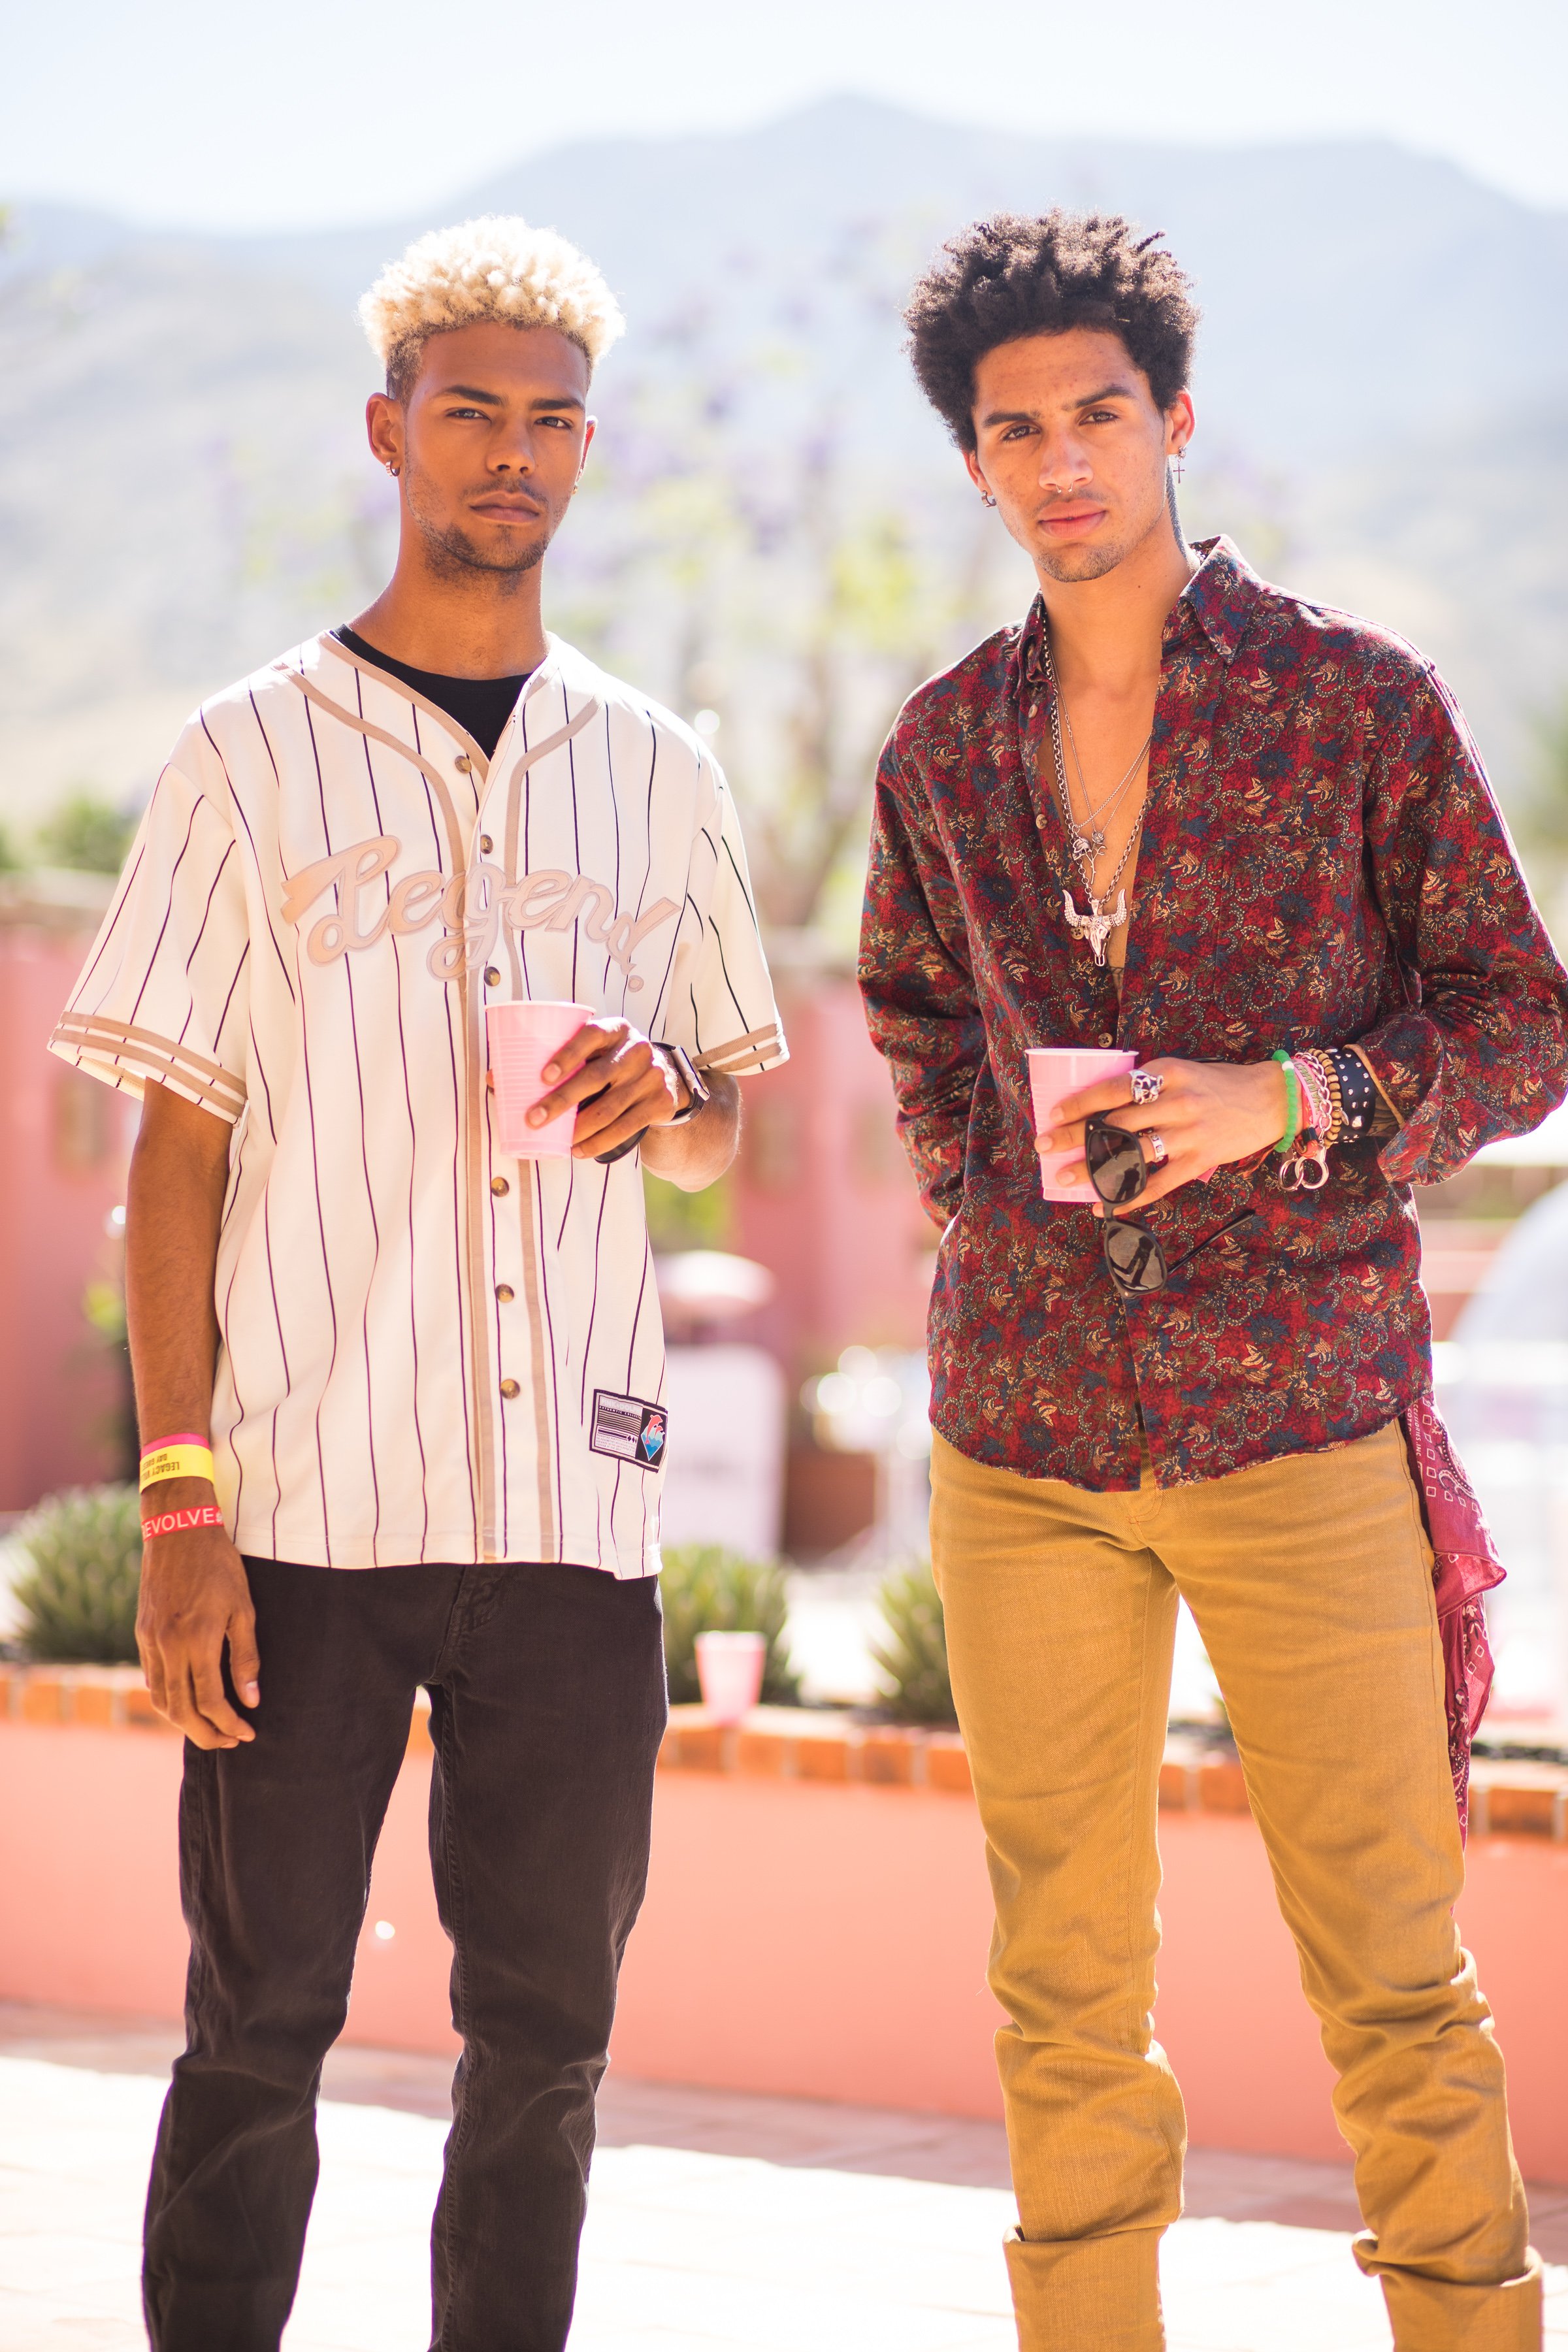 Ultimate Hollywood Coachella Poolside Party two dudes.jpg